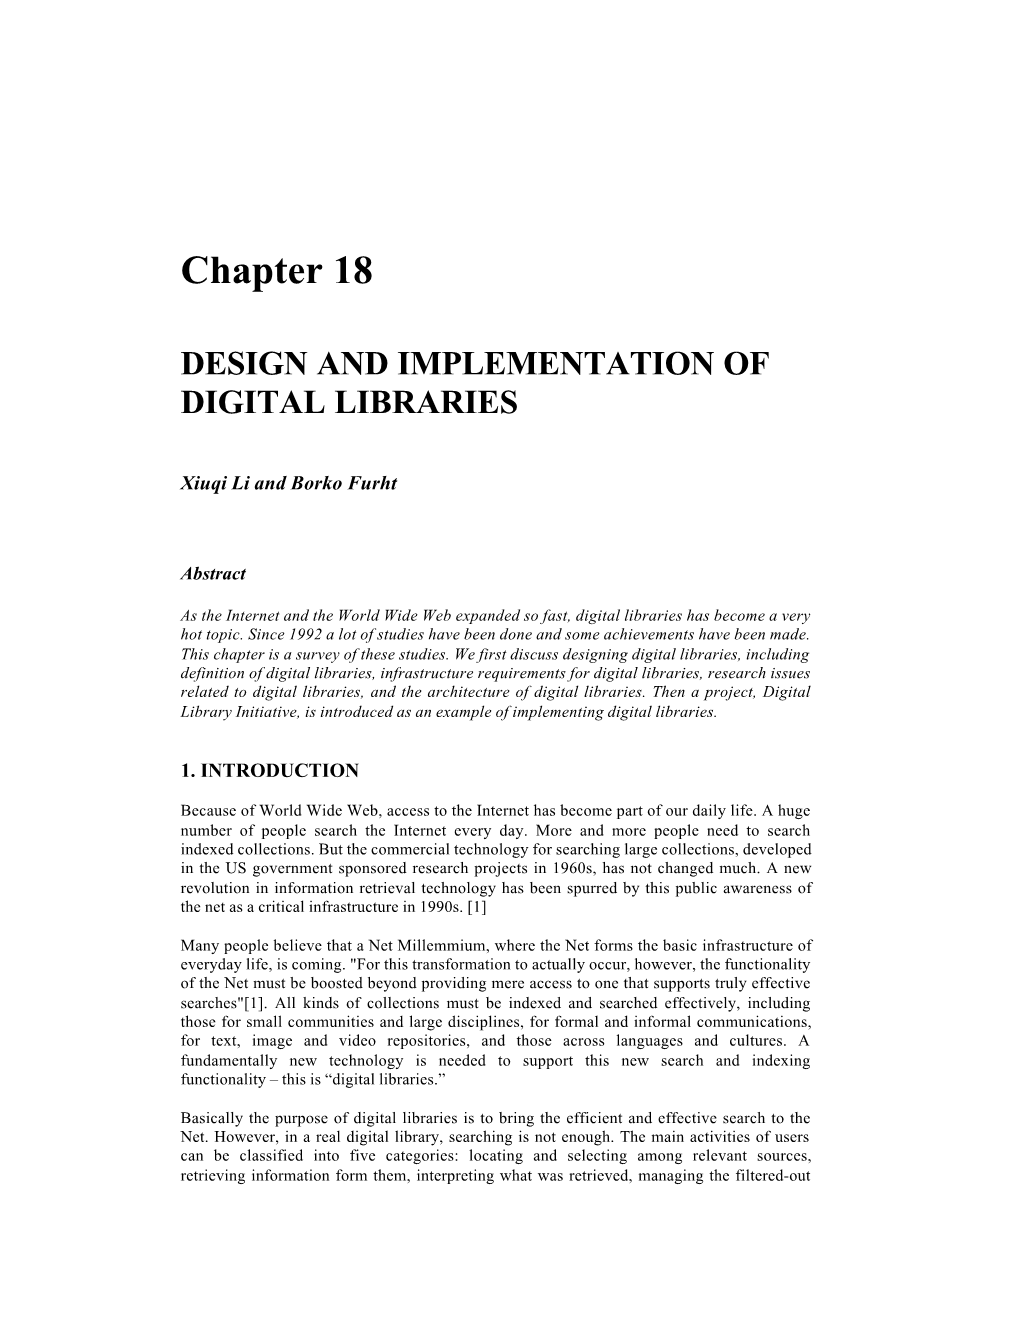 Design and Implementation of Digital Libraries